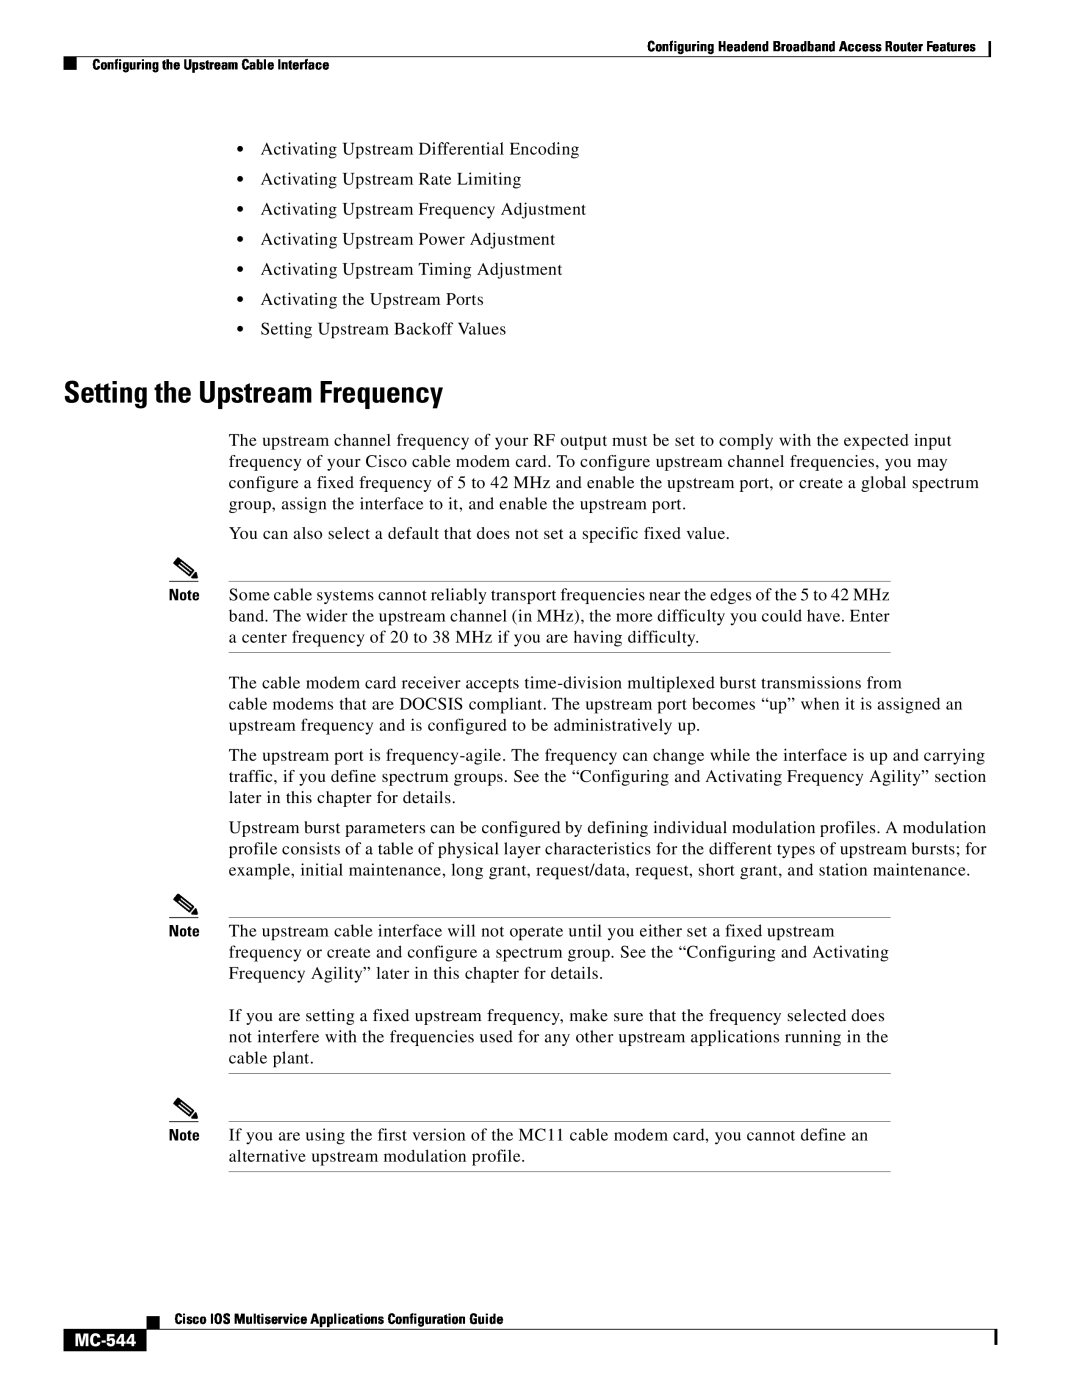 Cisco Systems uBR7200 manual Setting the Upstream Frequency, MC-544 